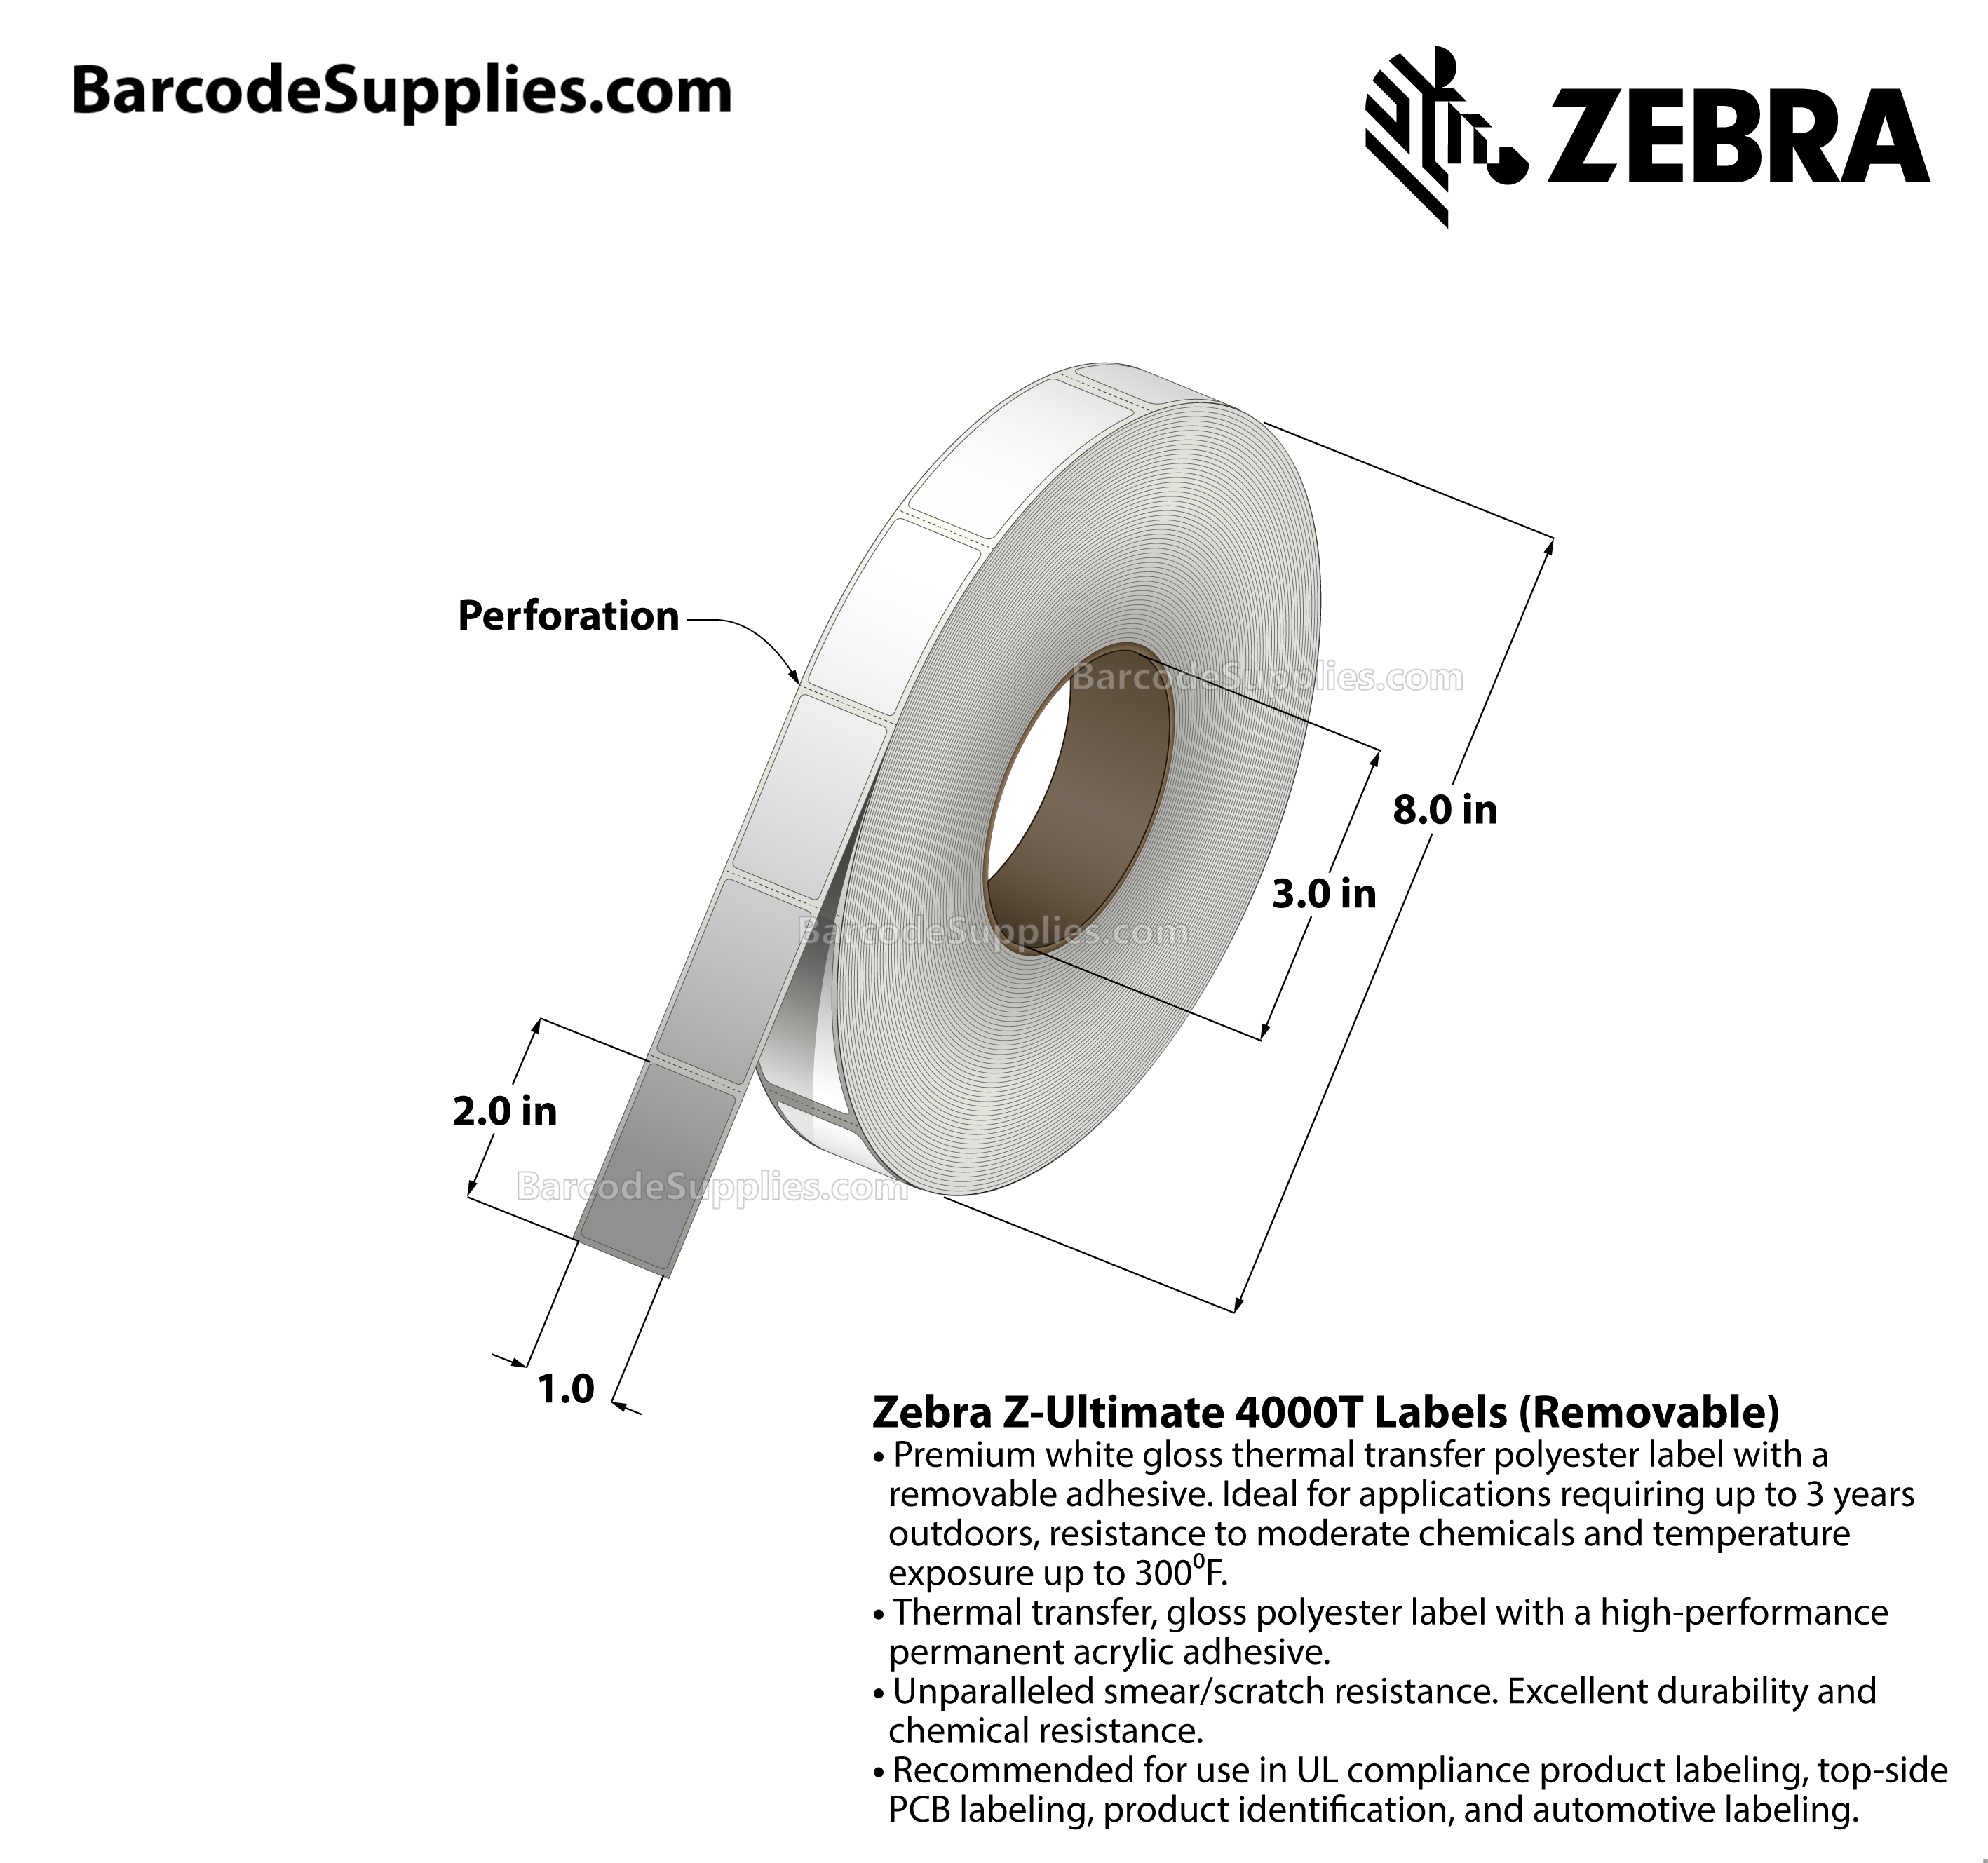 1 x 2 Thermal Transfer White Z-Ultimate 4000T Removable Labels With Removable Adhesive - Perforated - 3000 Labels Per Roll - Carton Of 1 Rolls - 3000 Labels Total - MPN: 10023149